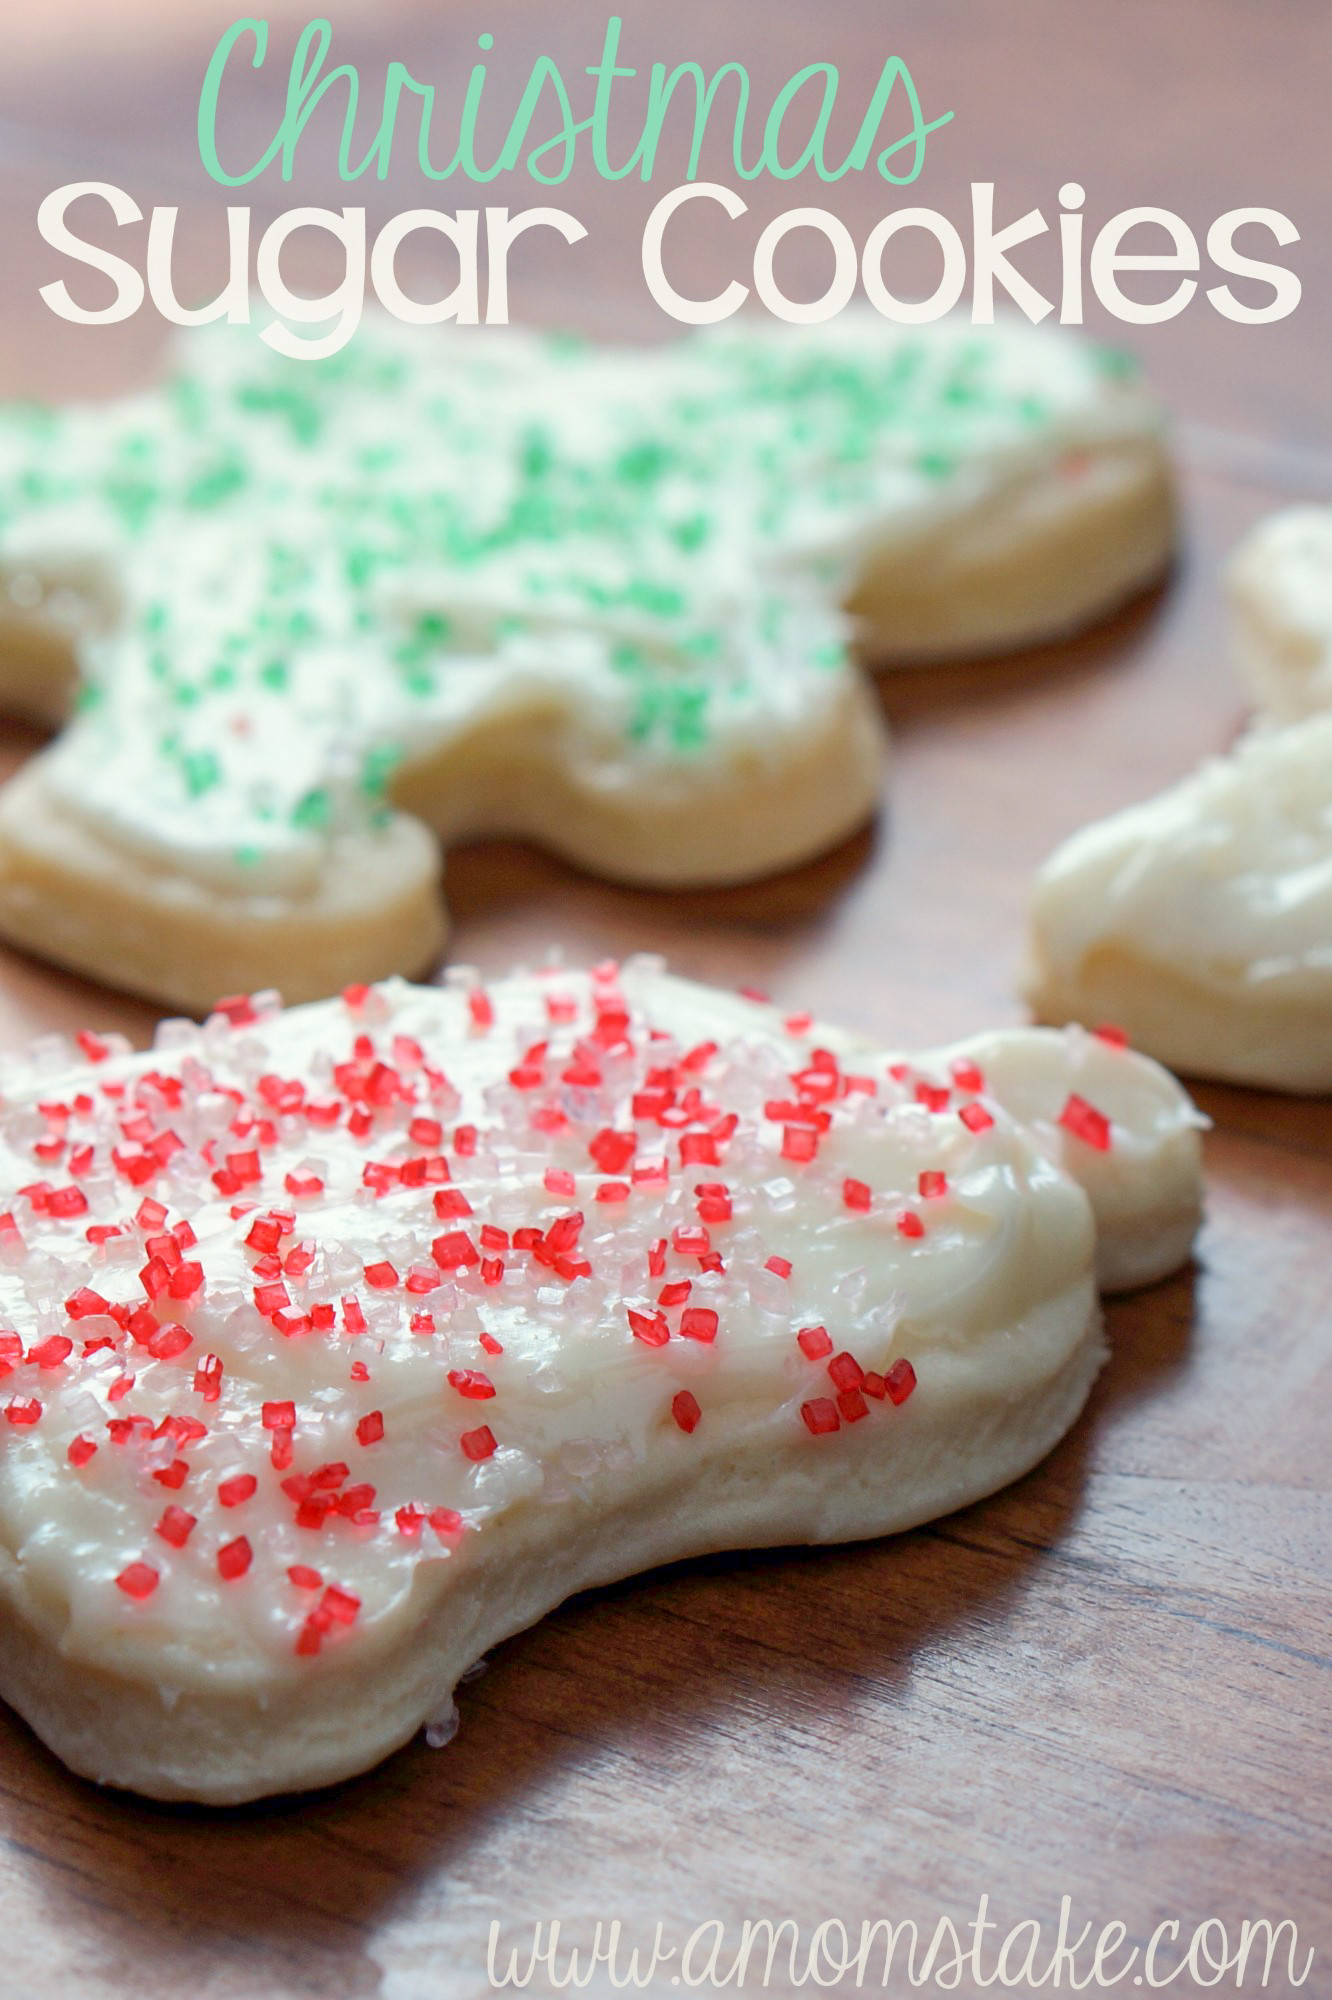 Recipes For Christmas Sugar Cookies
 10 Christmas Cookies Recipes For The Holidays